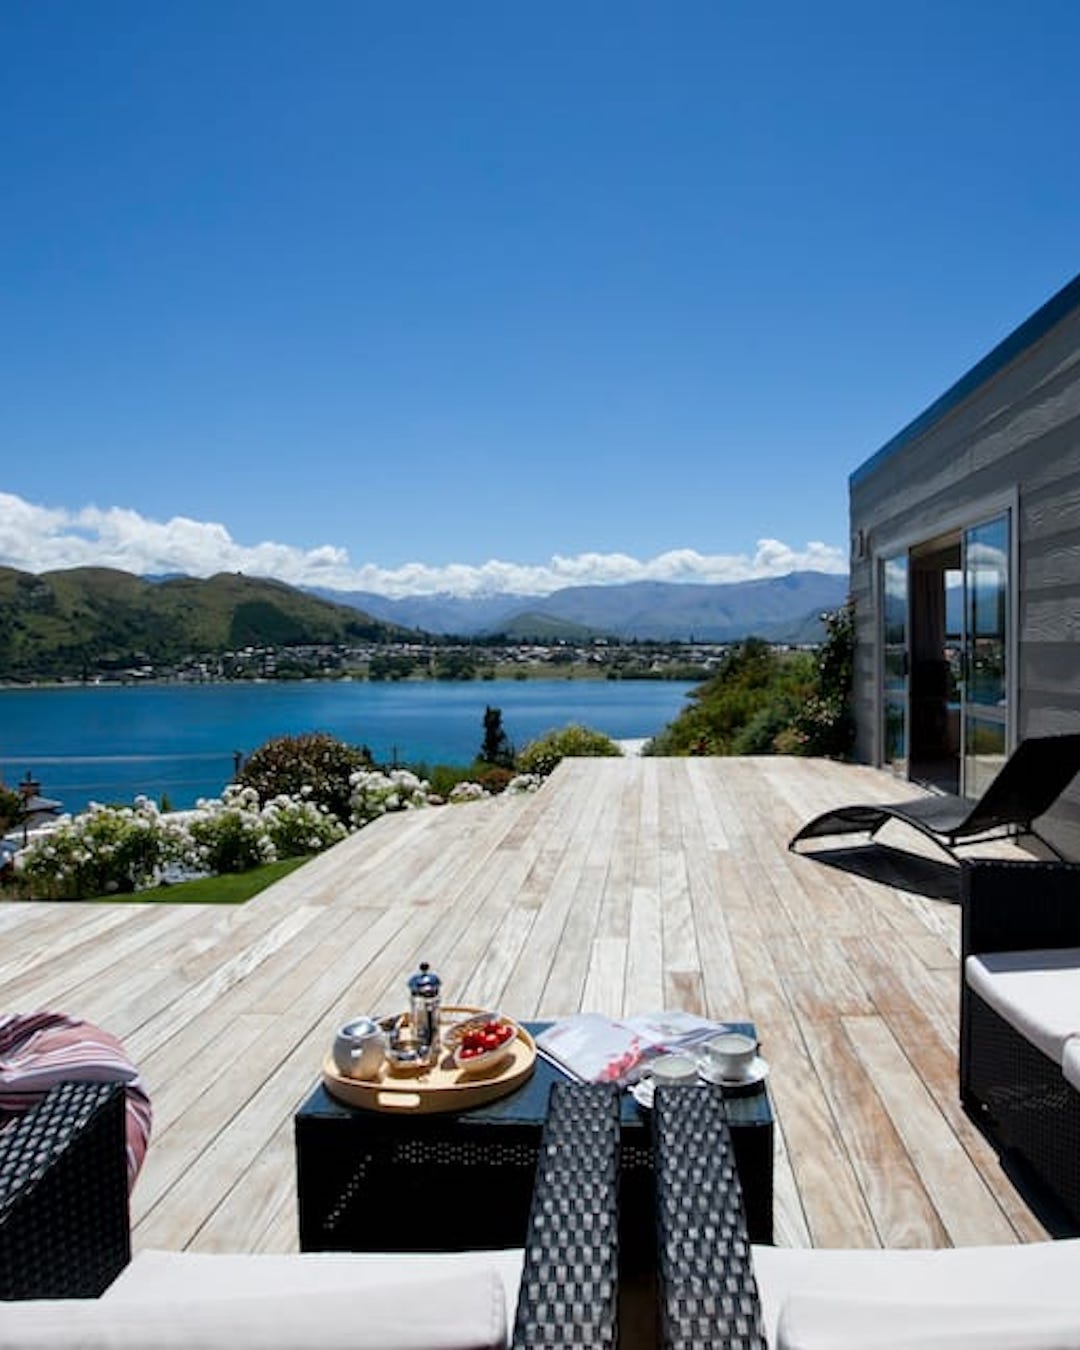 A large verandah overlooking the lake and mountains in Queenstown. One of the best airbnbs in NZ.